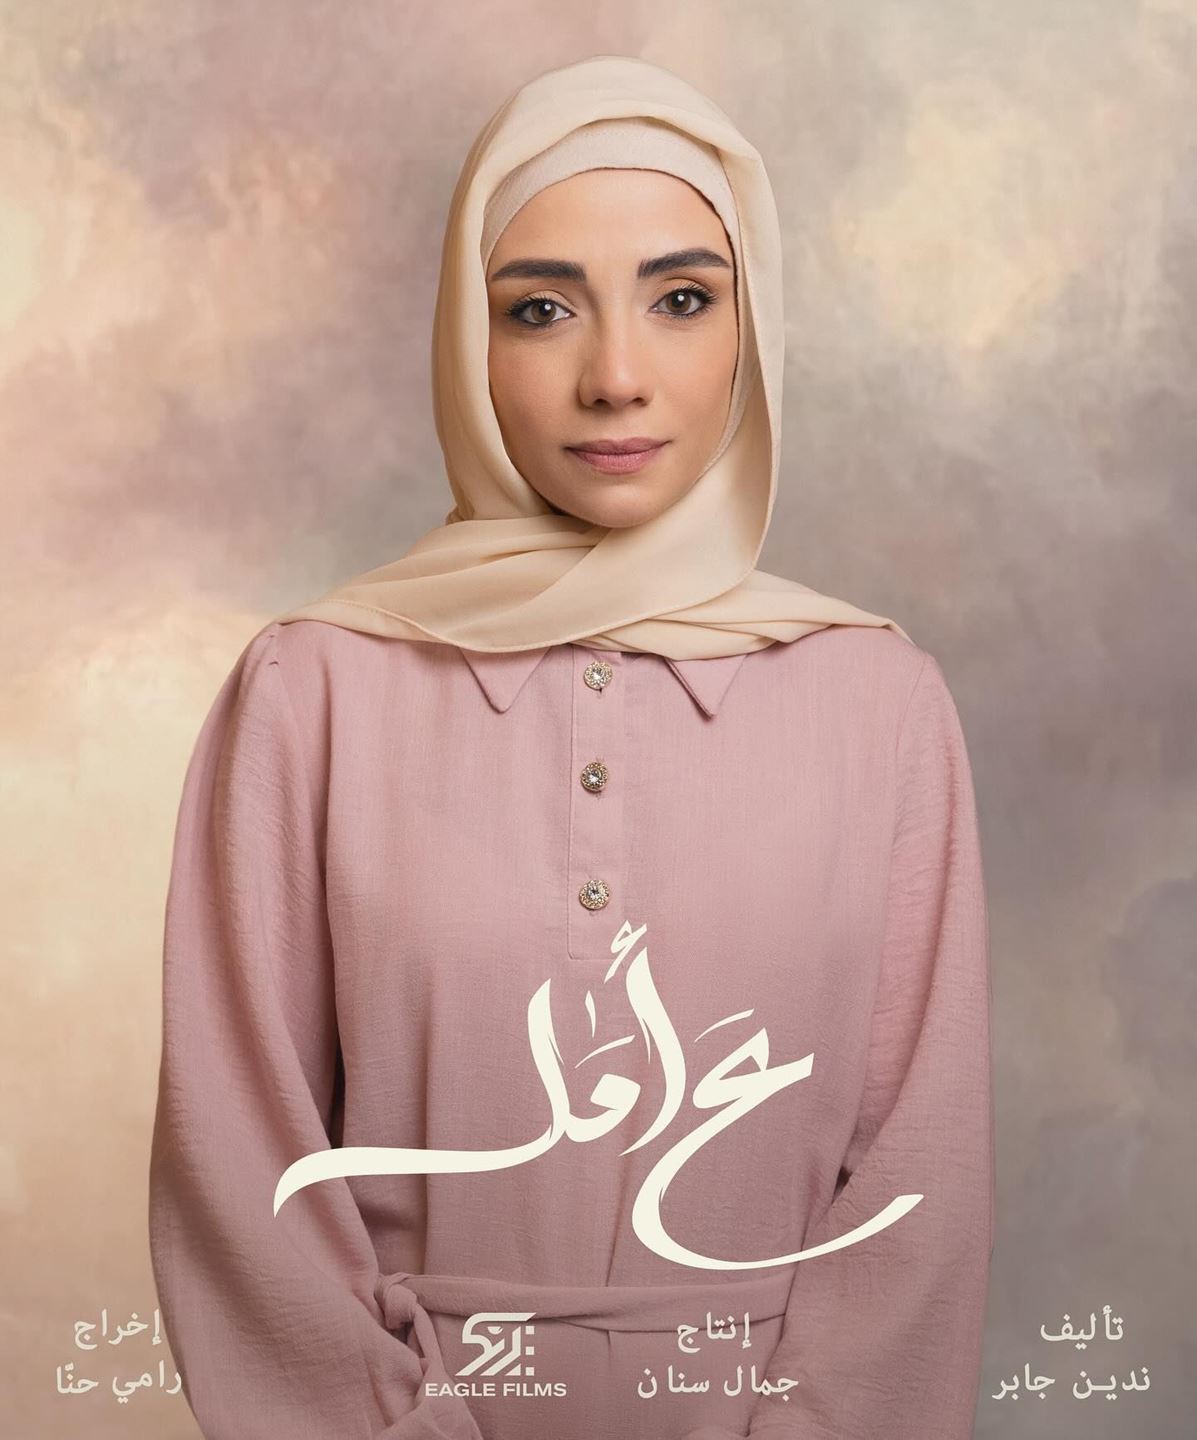 Who played the role of "Rahaf" in Lebanese Series "3a Amal"?